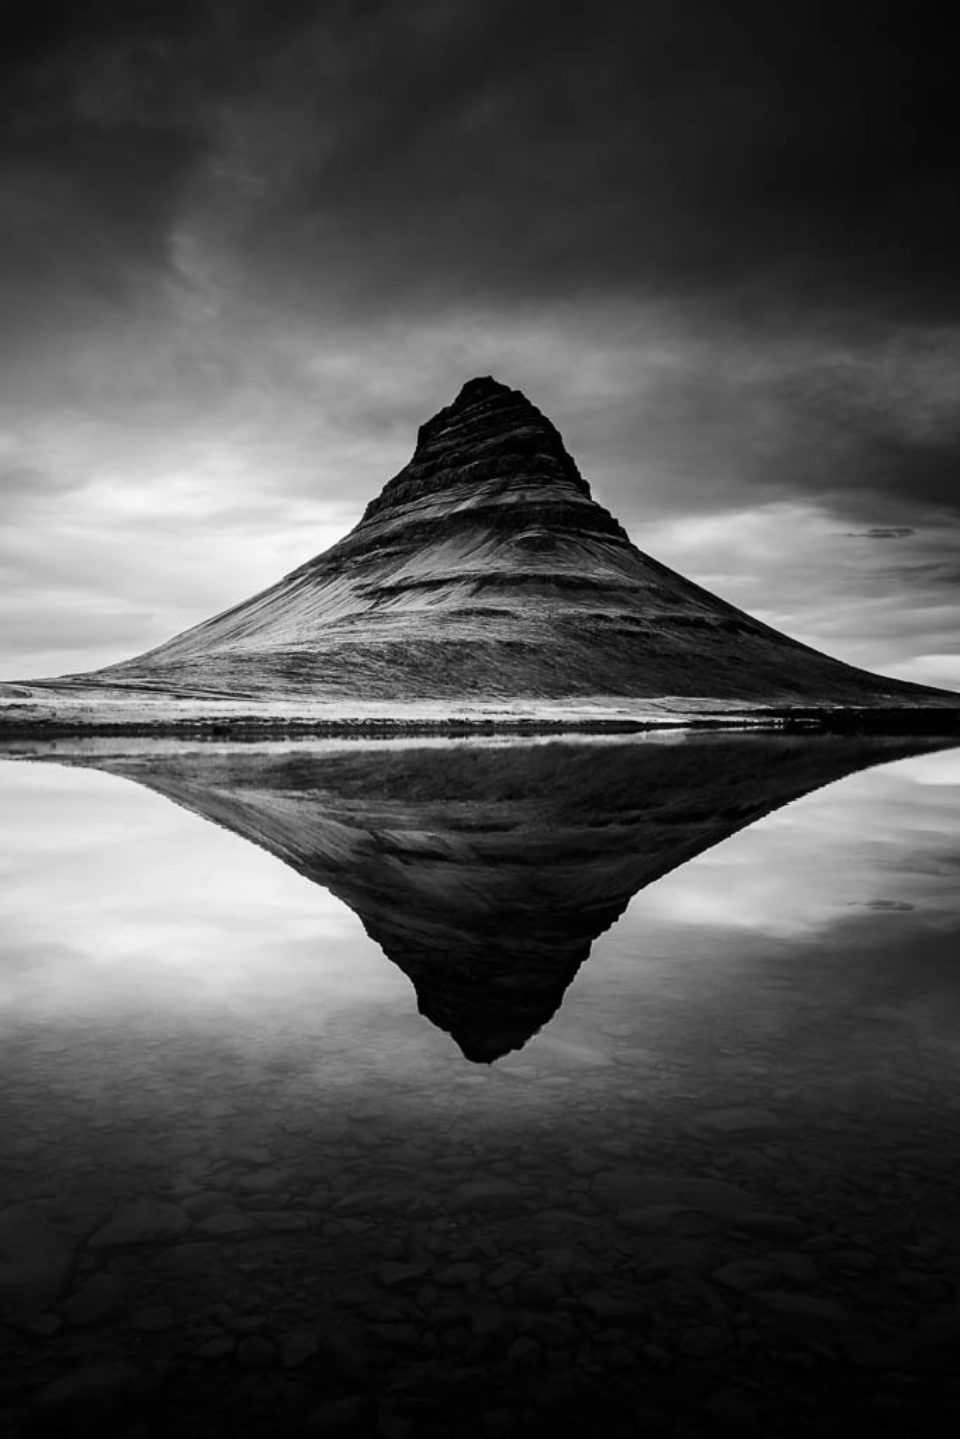 Reflection of Kirkjufell Mountain in Iceland in Black and White